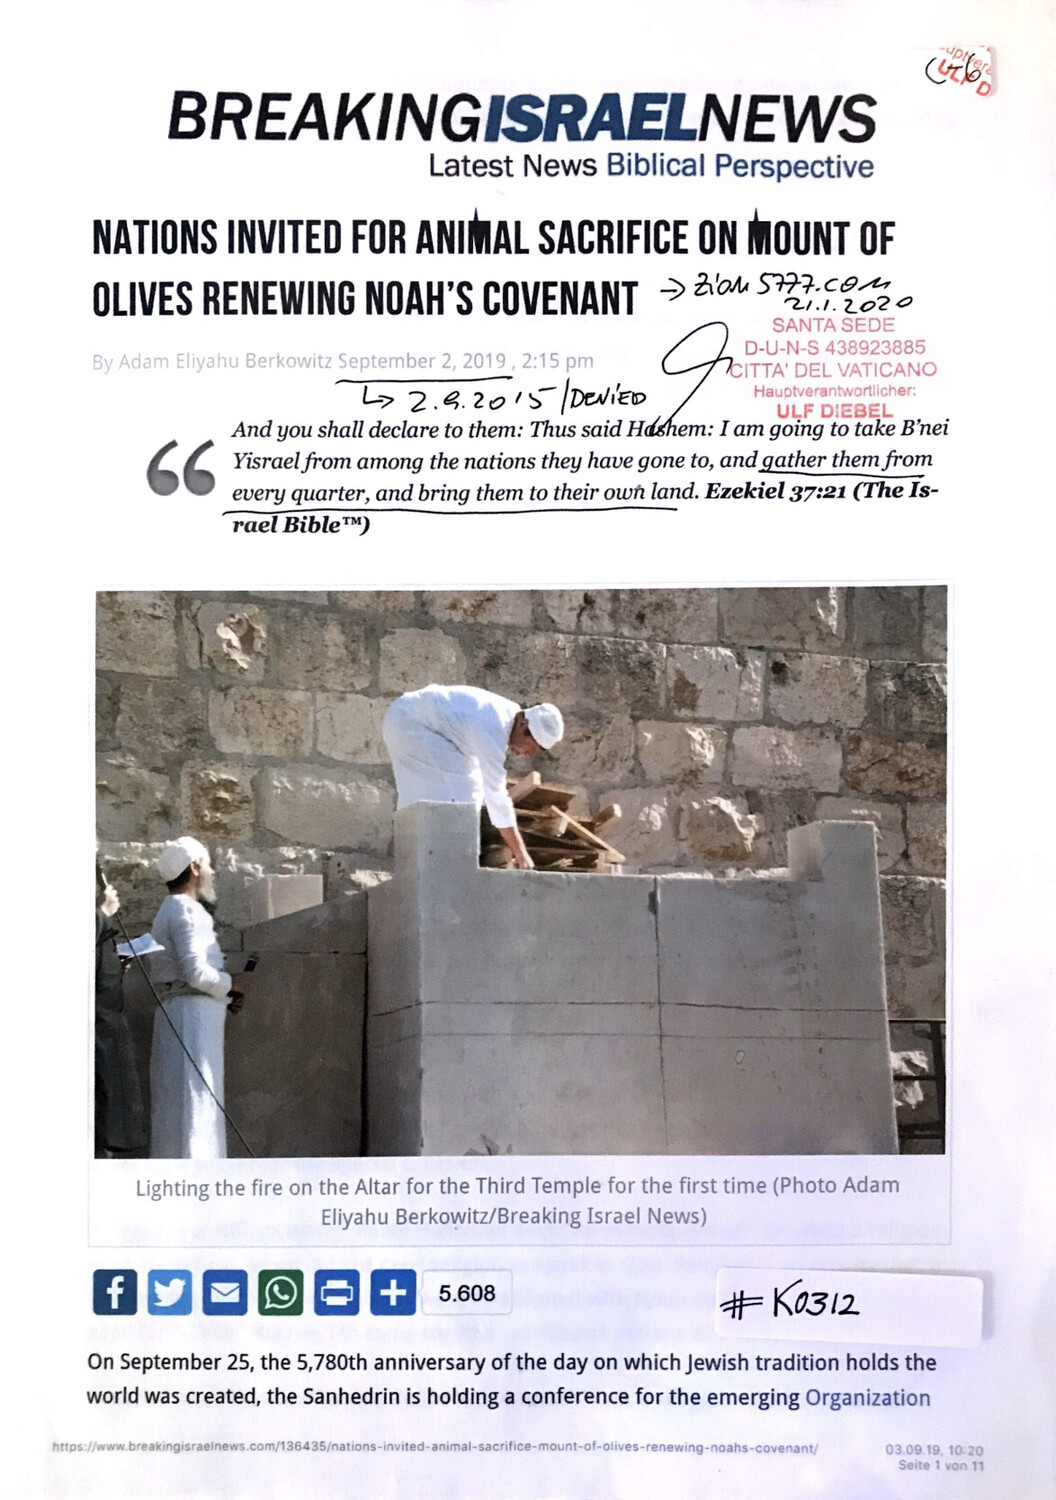 #K0312 l Breaking Israel News - Nations invited for animal sacrifice on Mount of Olives renewing Noah’s Covenant